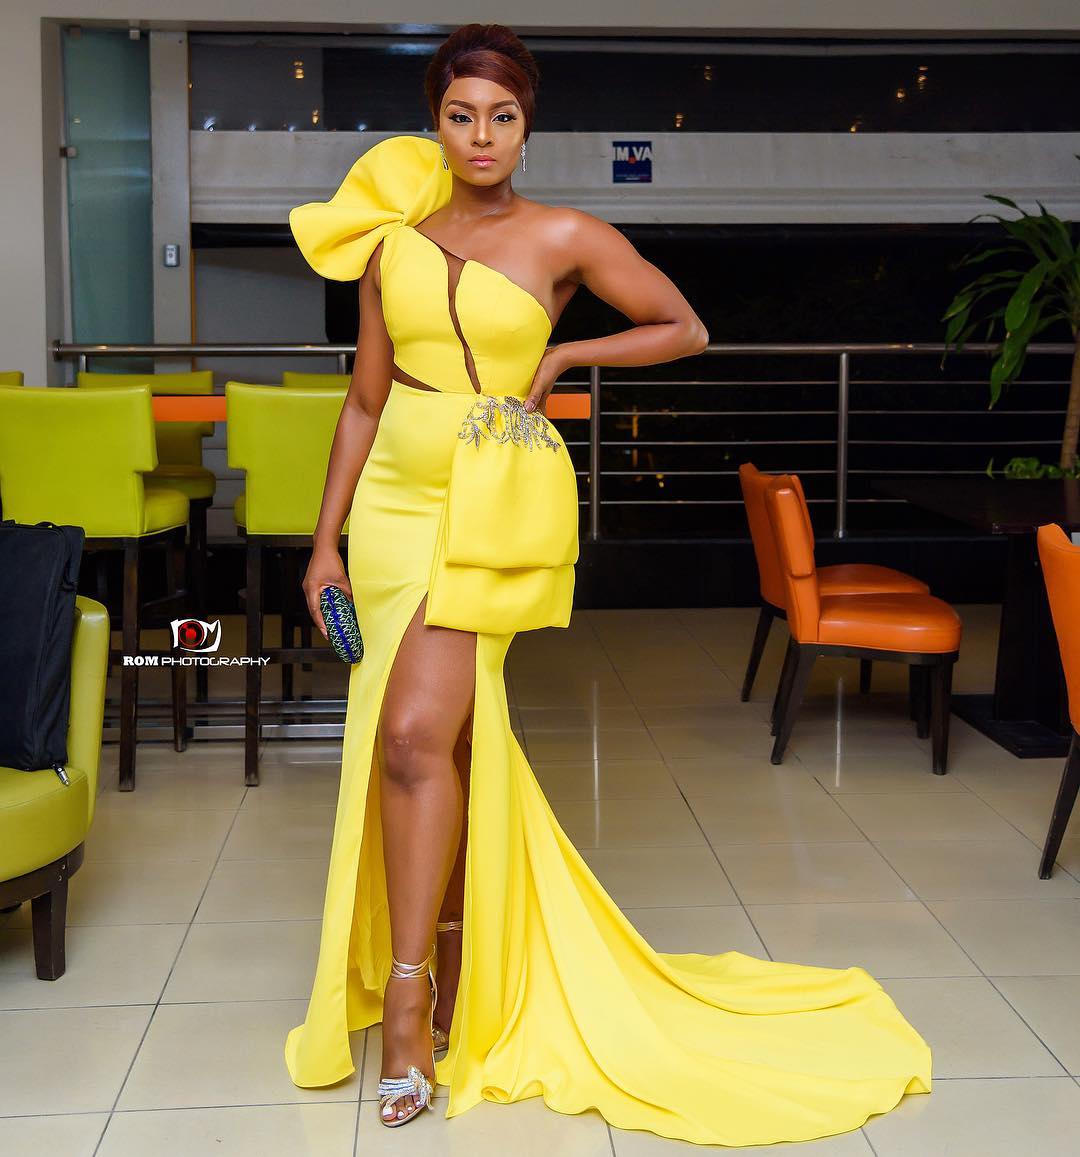 Osas Ighodaro Ajibade dressed in a yellow dinner gown